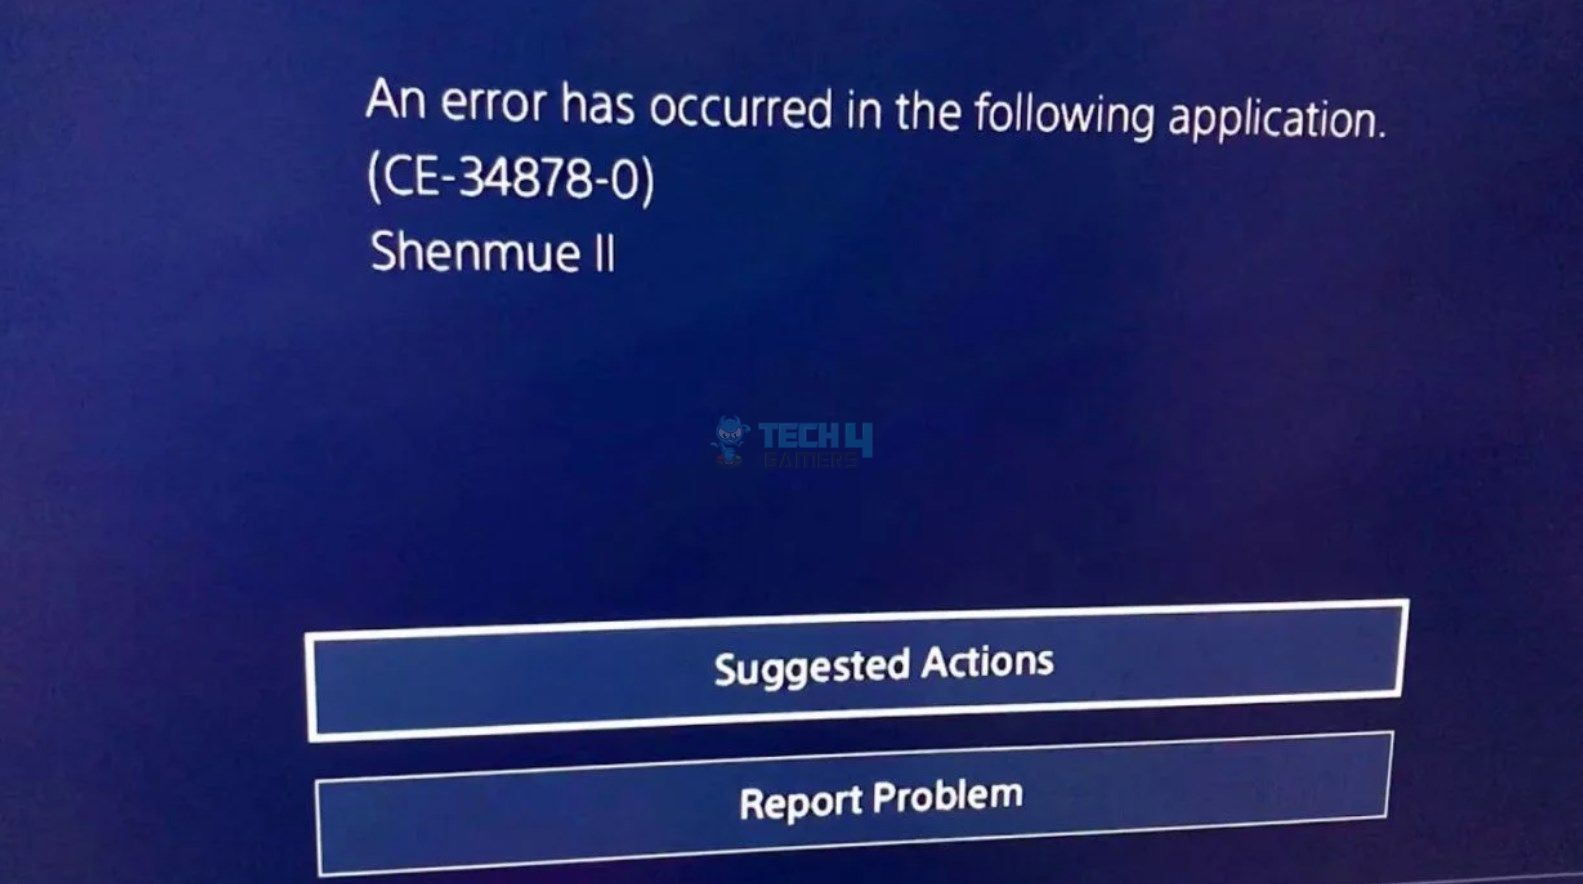 If none of the above methods resolve the issue, it is recommended to contact PlayStation Support for further assistance
Provide them with the error code (CE-34878-0) and any relevant information about the problem